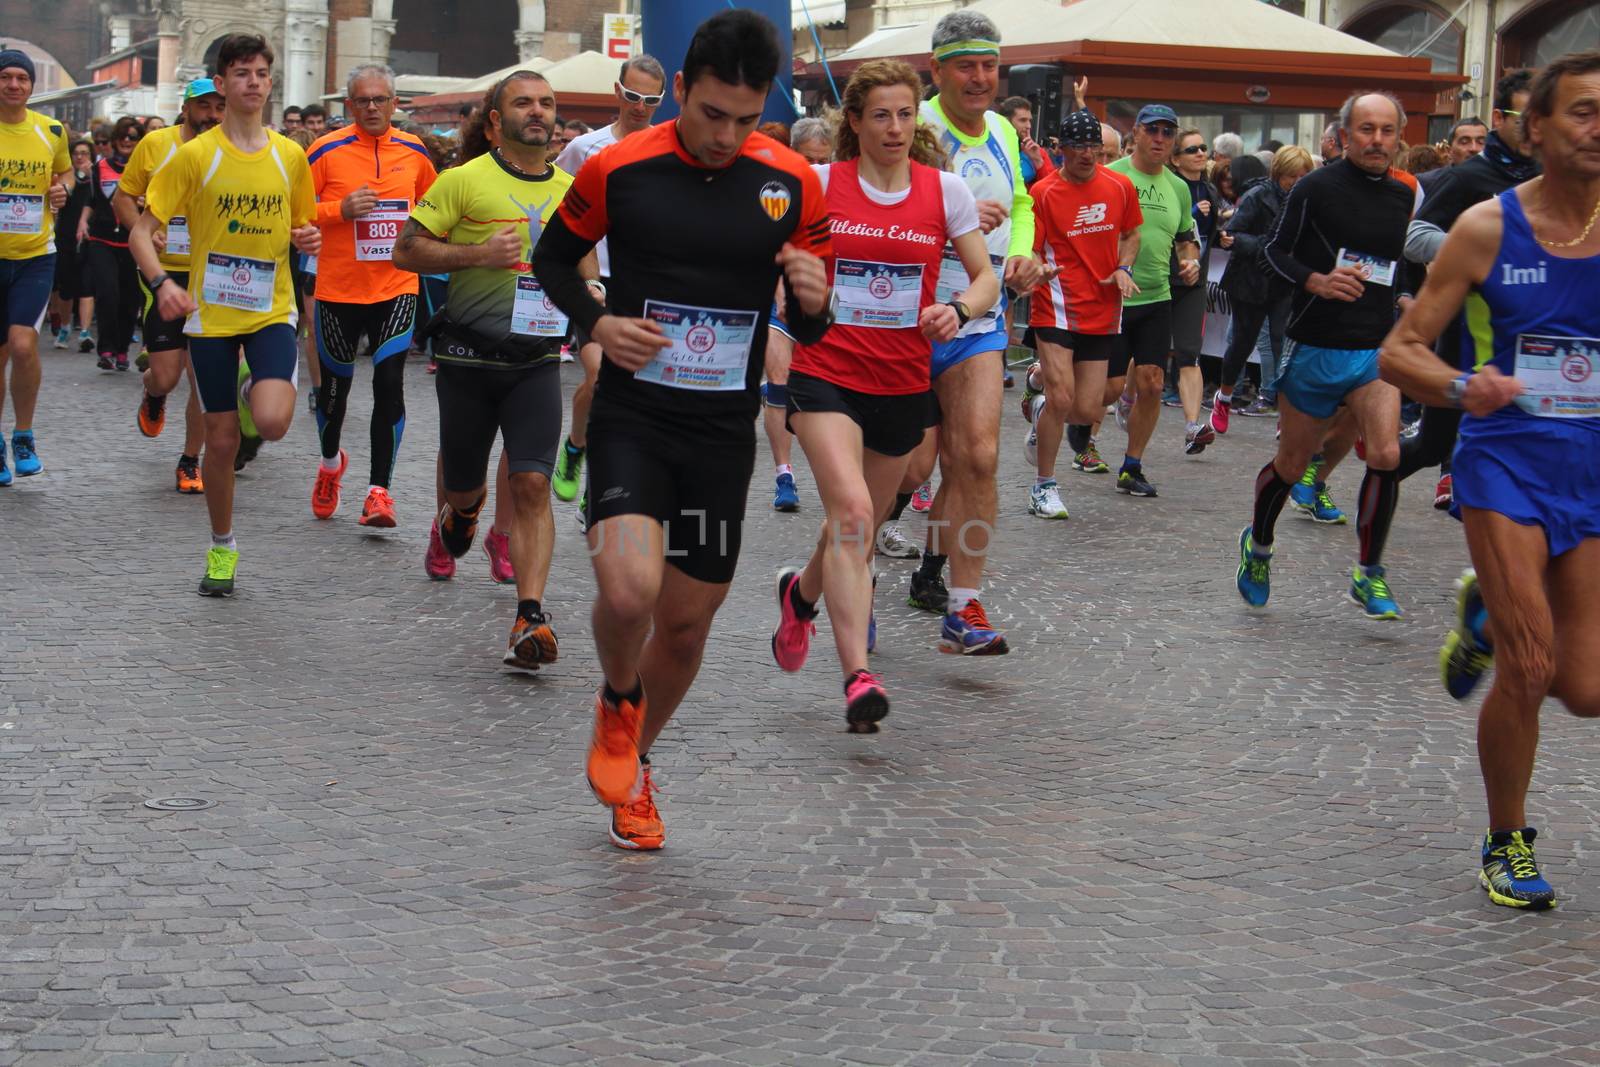 Ferrara, Italy - 20 march 2016 -  FERRARA MARATHON FAMILY RUN - the ludic-motor event by running or walking at any pace that allows you to experience the excitement of the Marathon